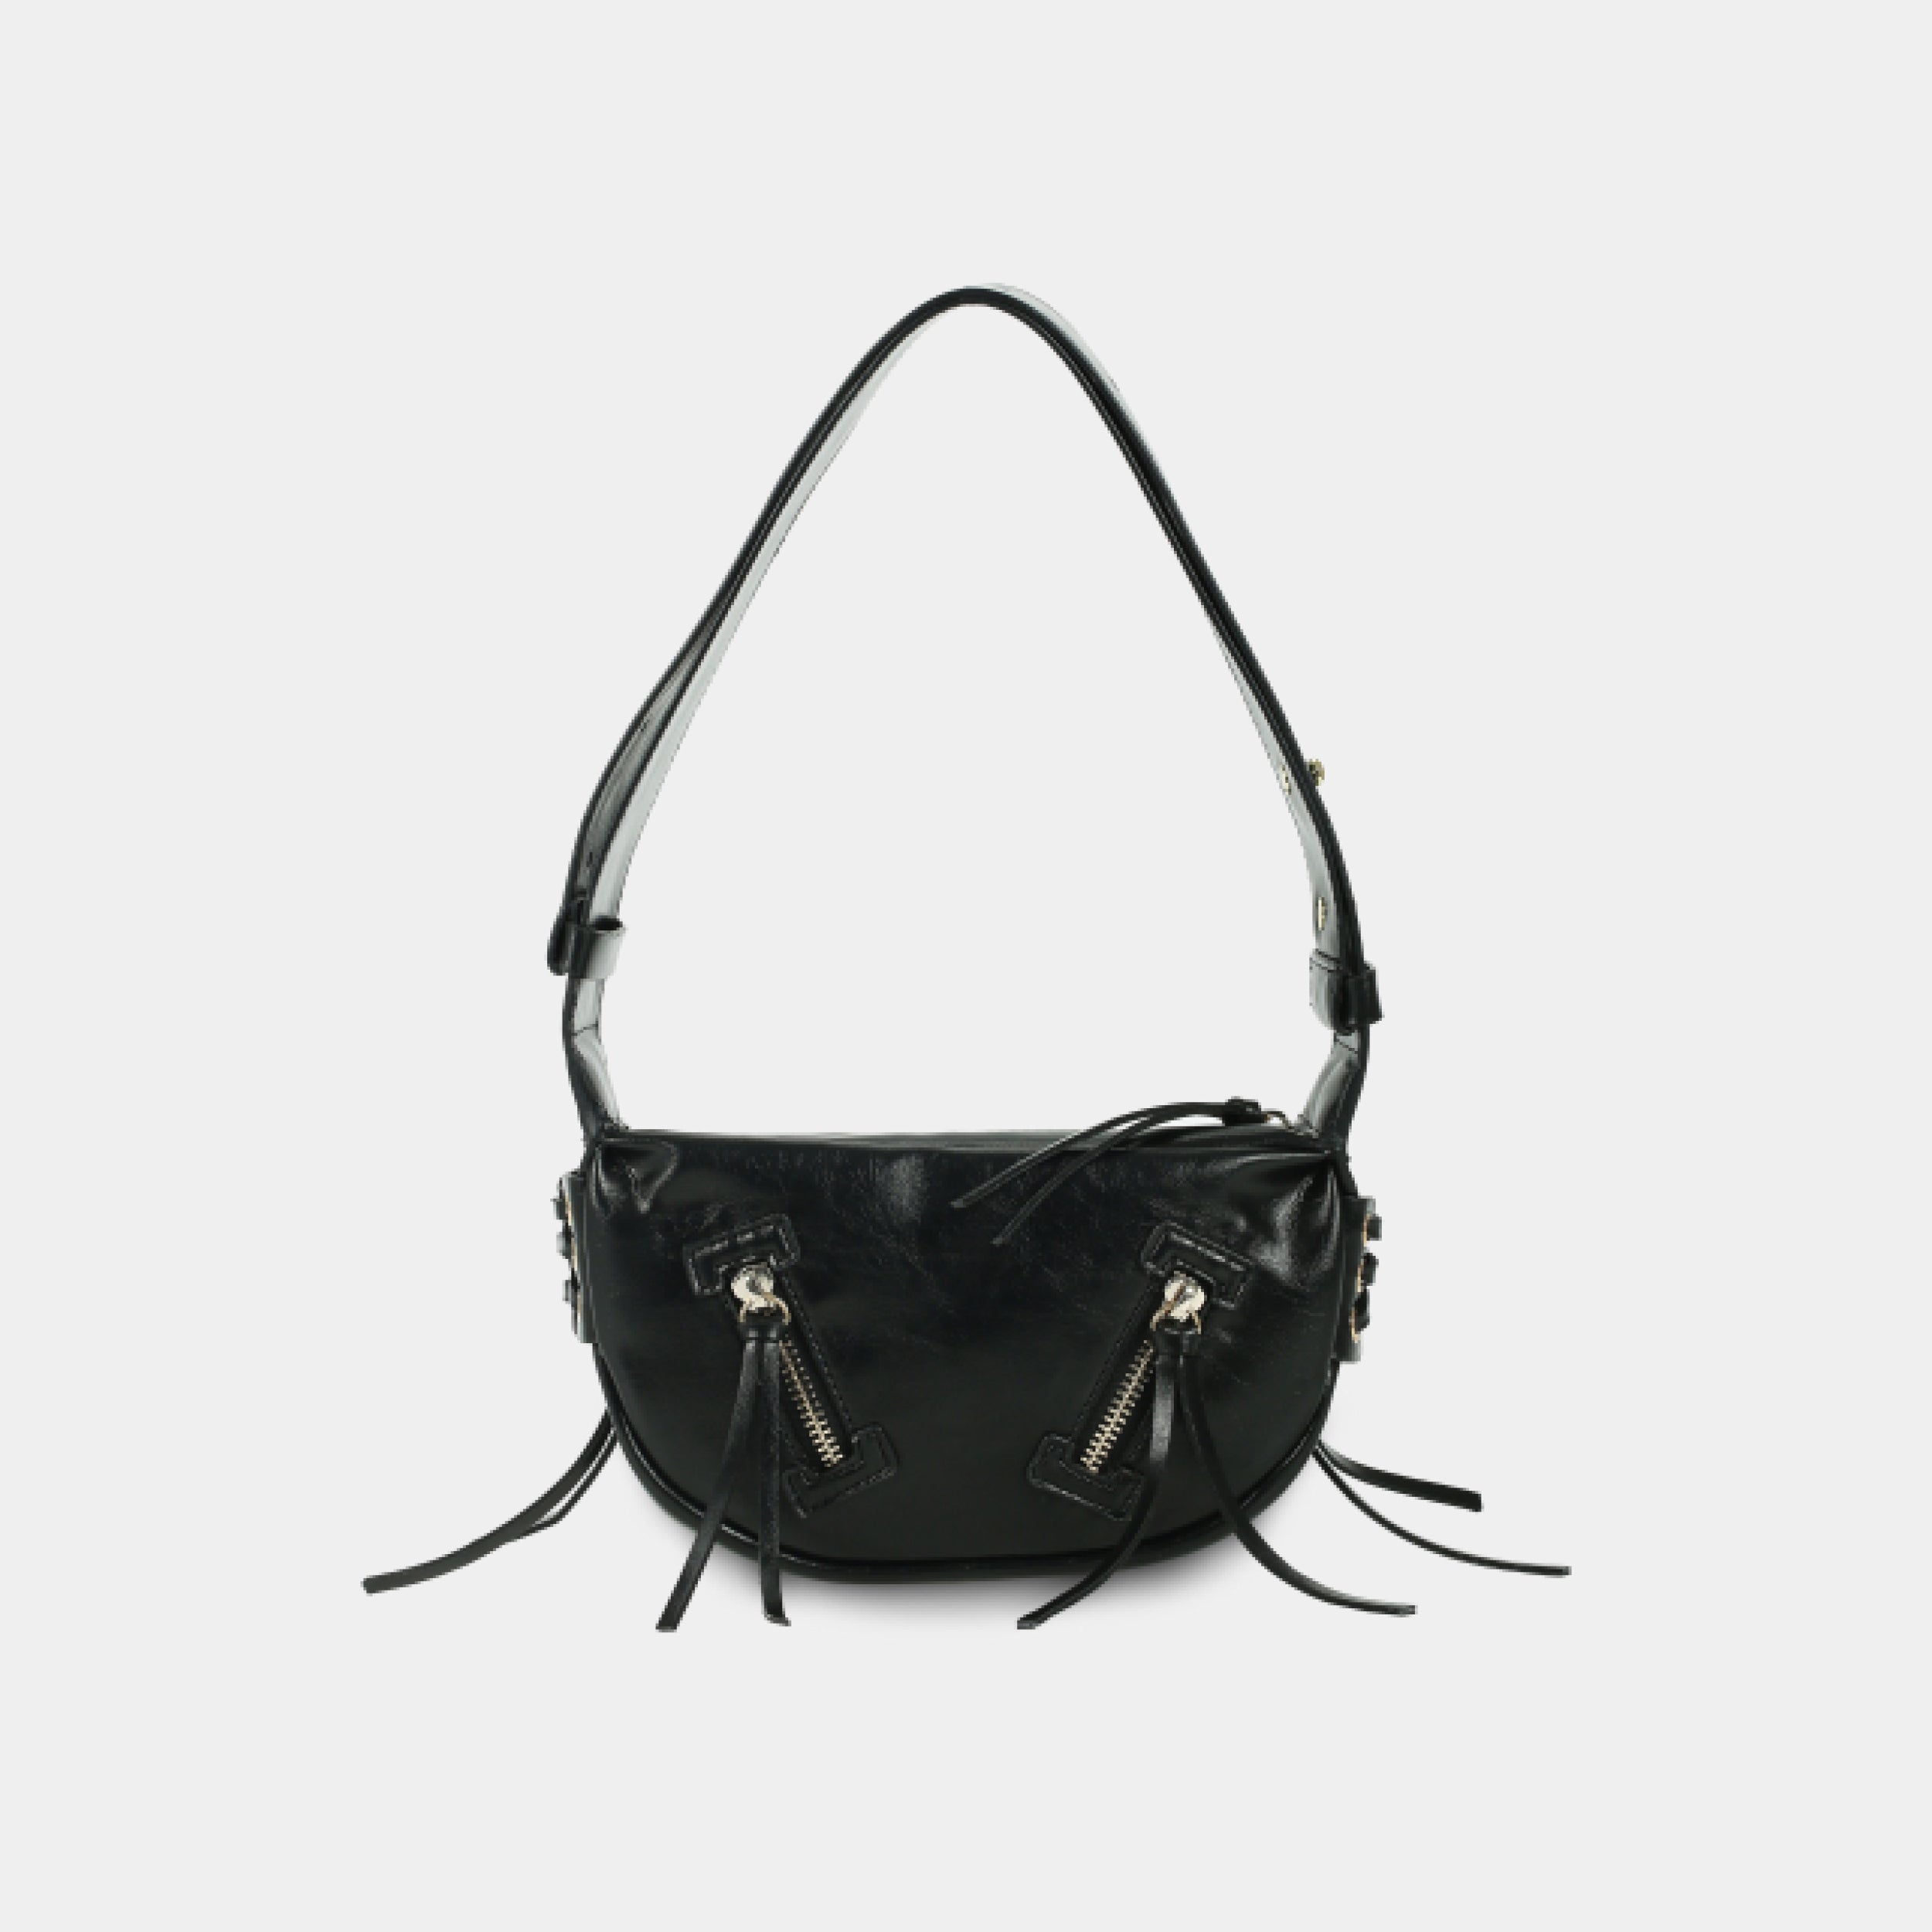 LACE bag small size (S) black